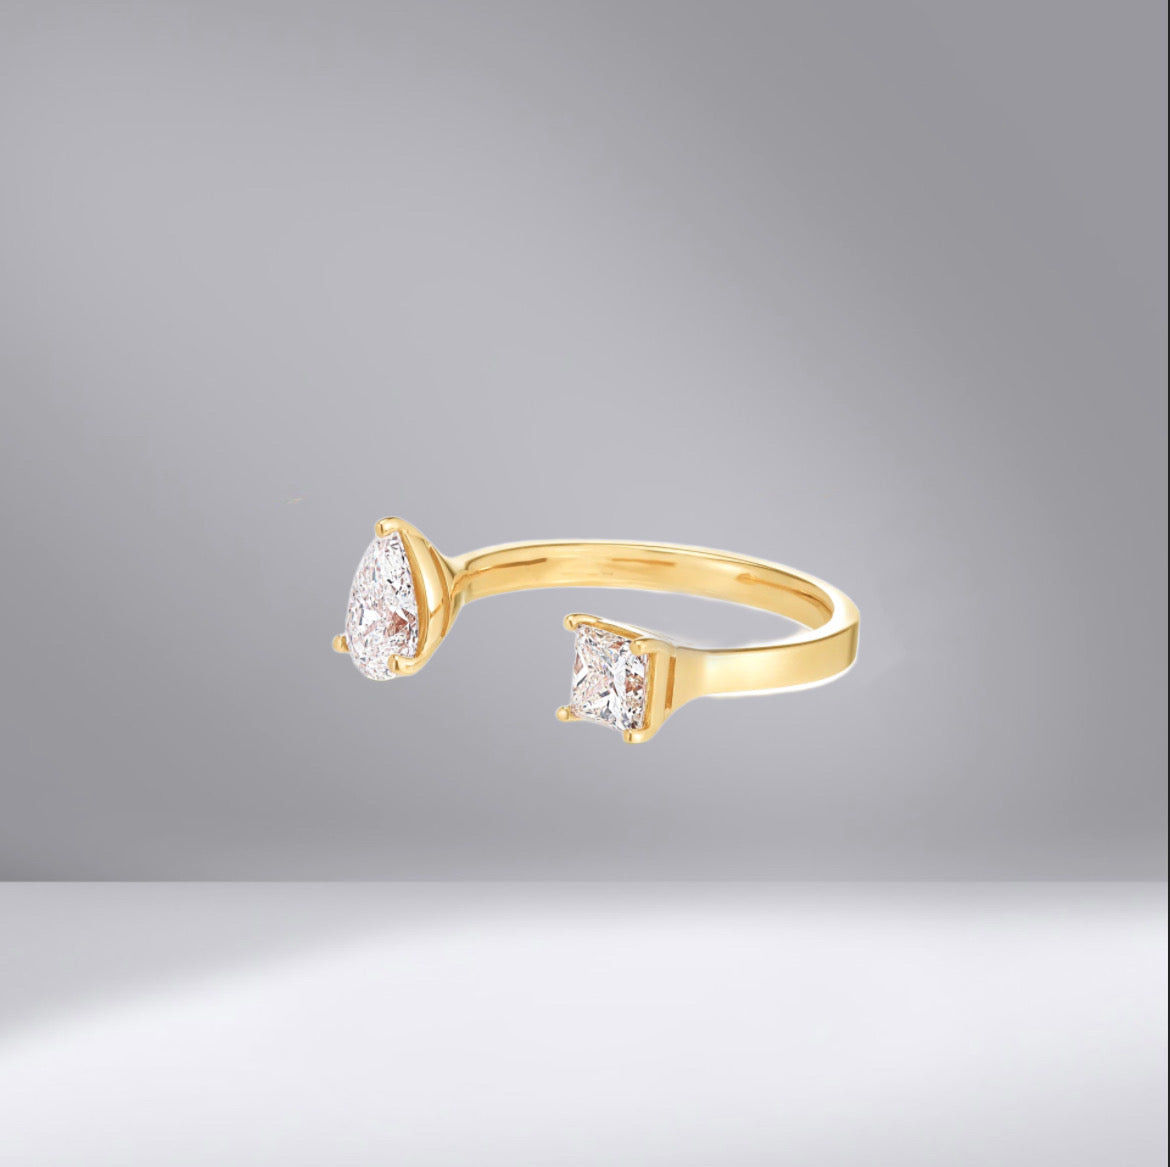 Gold Gemini Ring is your favorite choice? Two Lab Grown Diamonds are embedded in the ring. Expressive and balanced, the Gemini is a study in creative harmony. With its tactile spirit and unisex appeal, the Gemini is an effortless mainstay. 